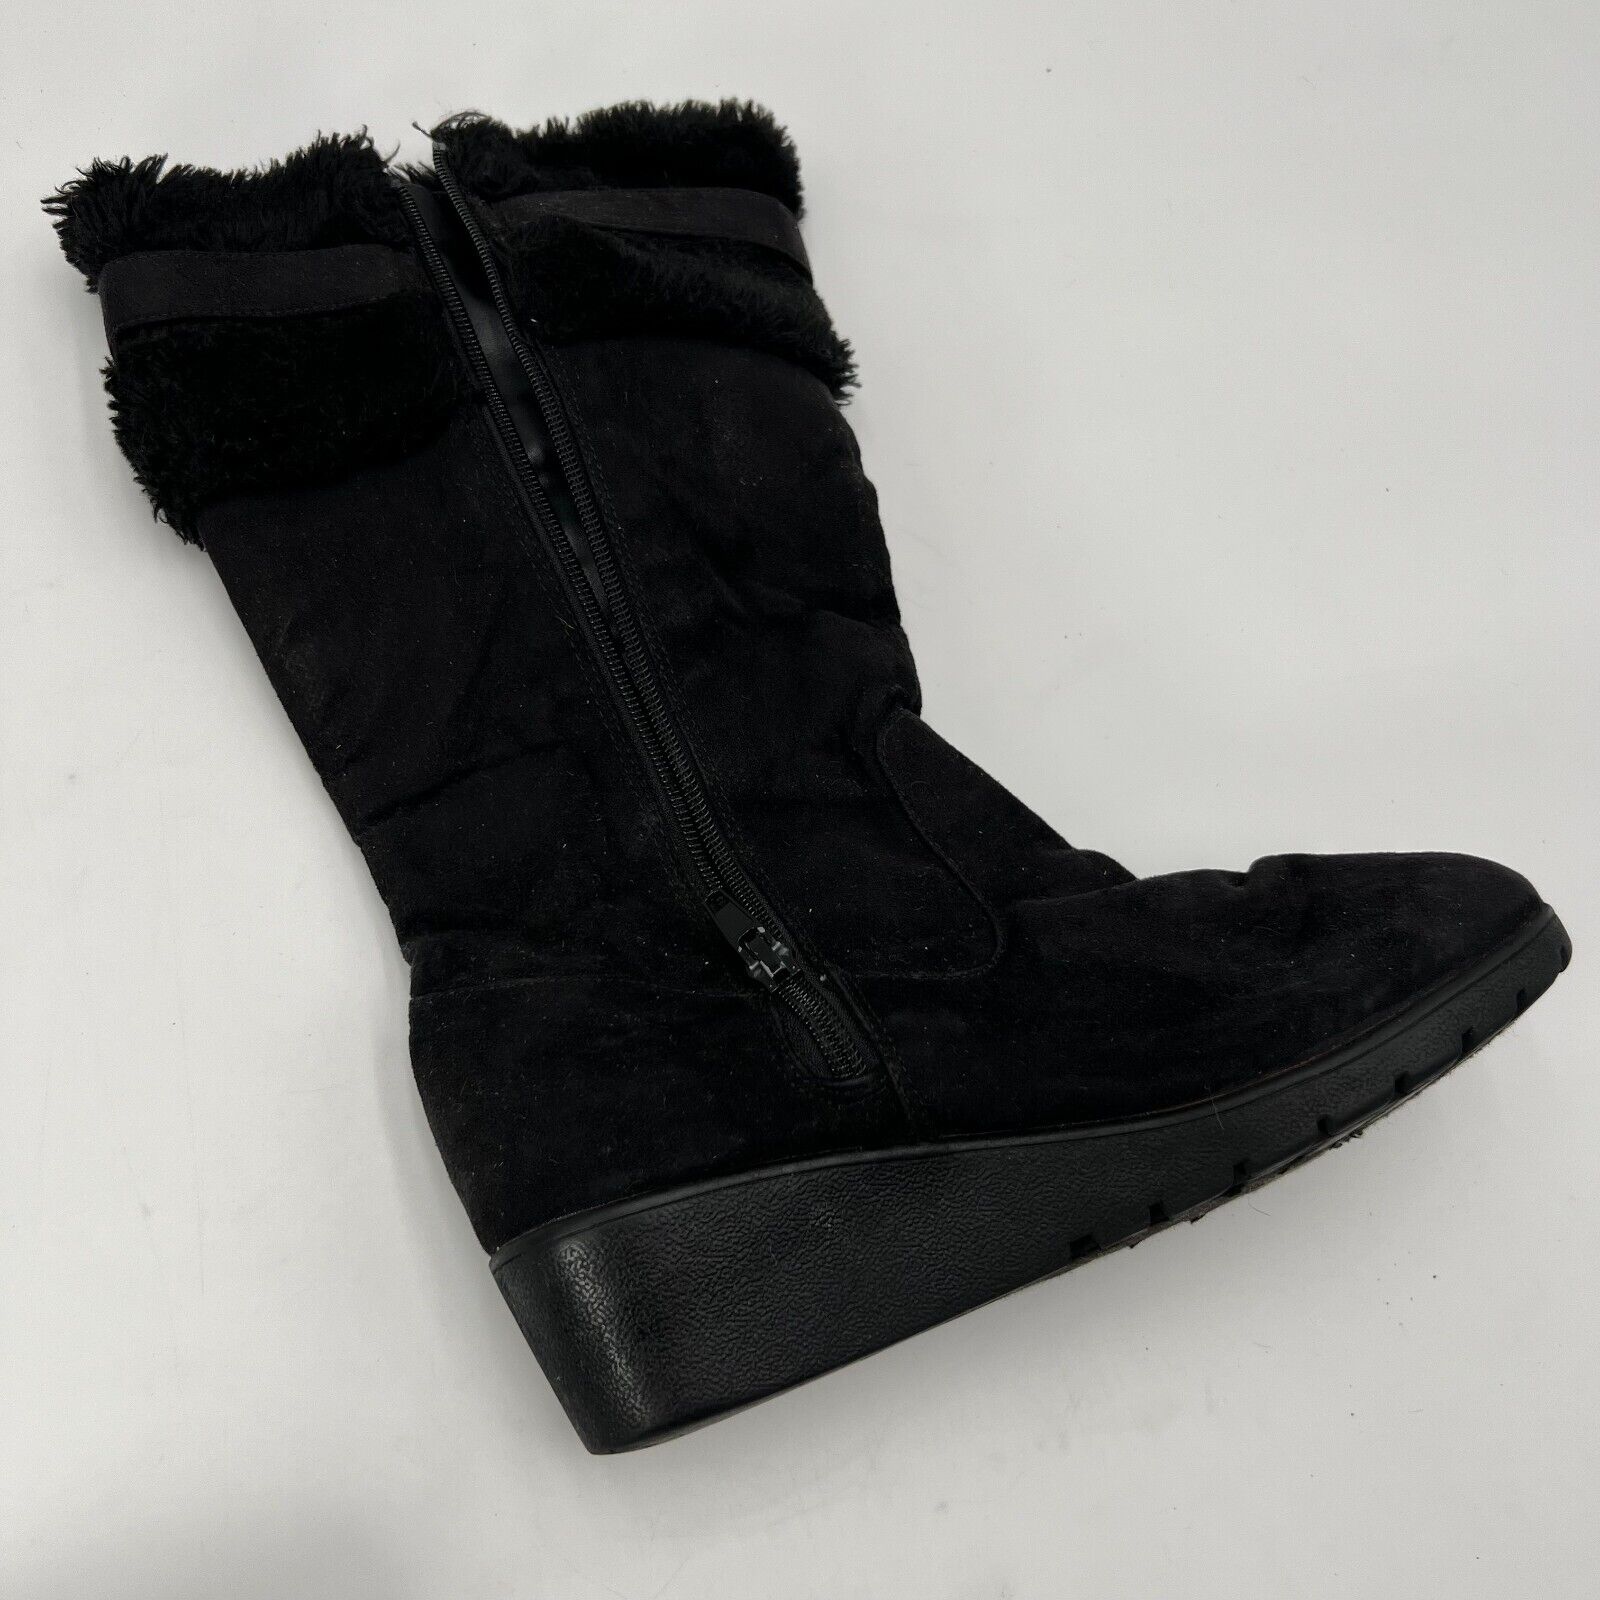 American Eagle AE Faux Fur Mid Calf Boot Side Zip Buckle Womens Size 4.5 US